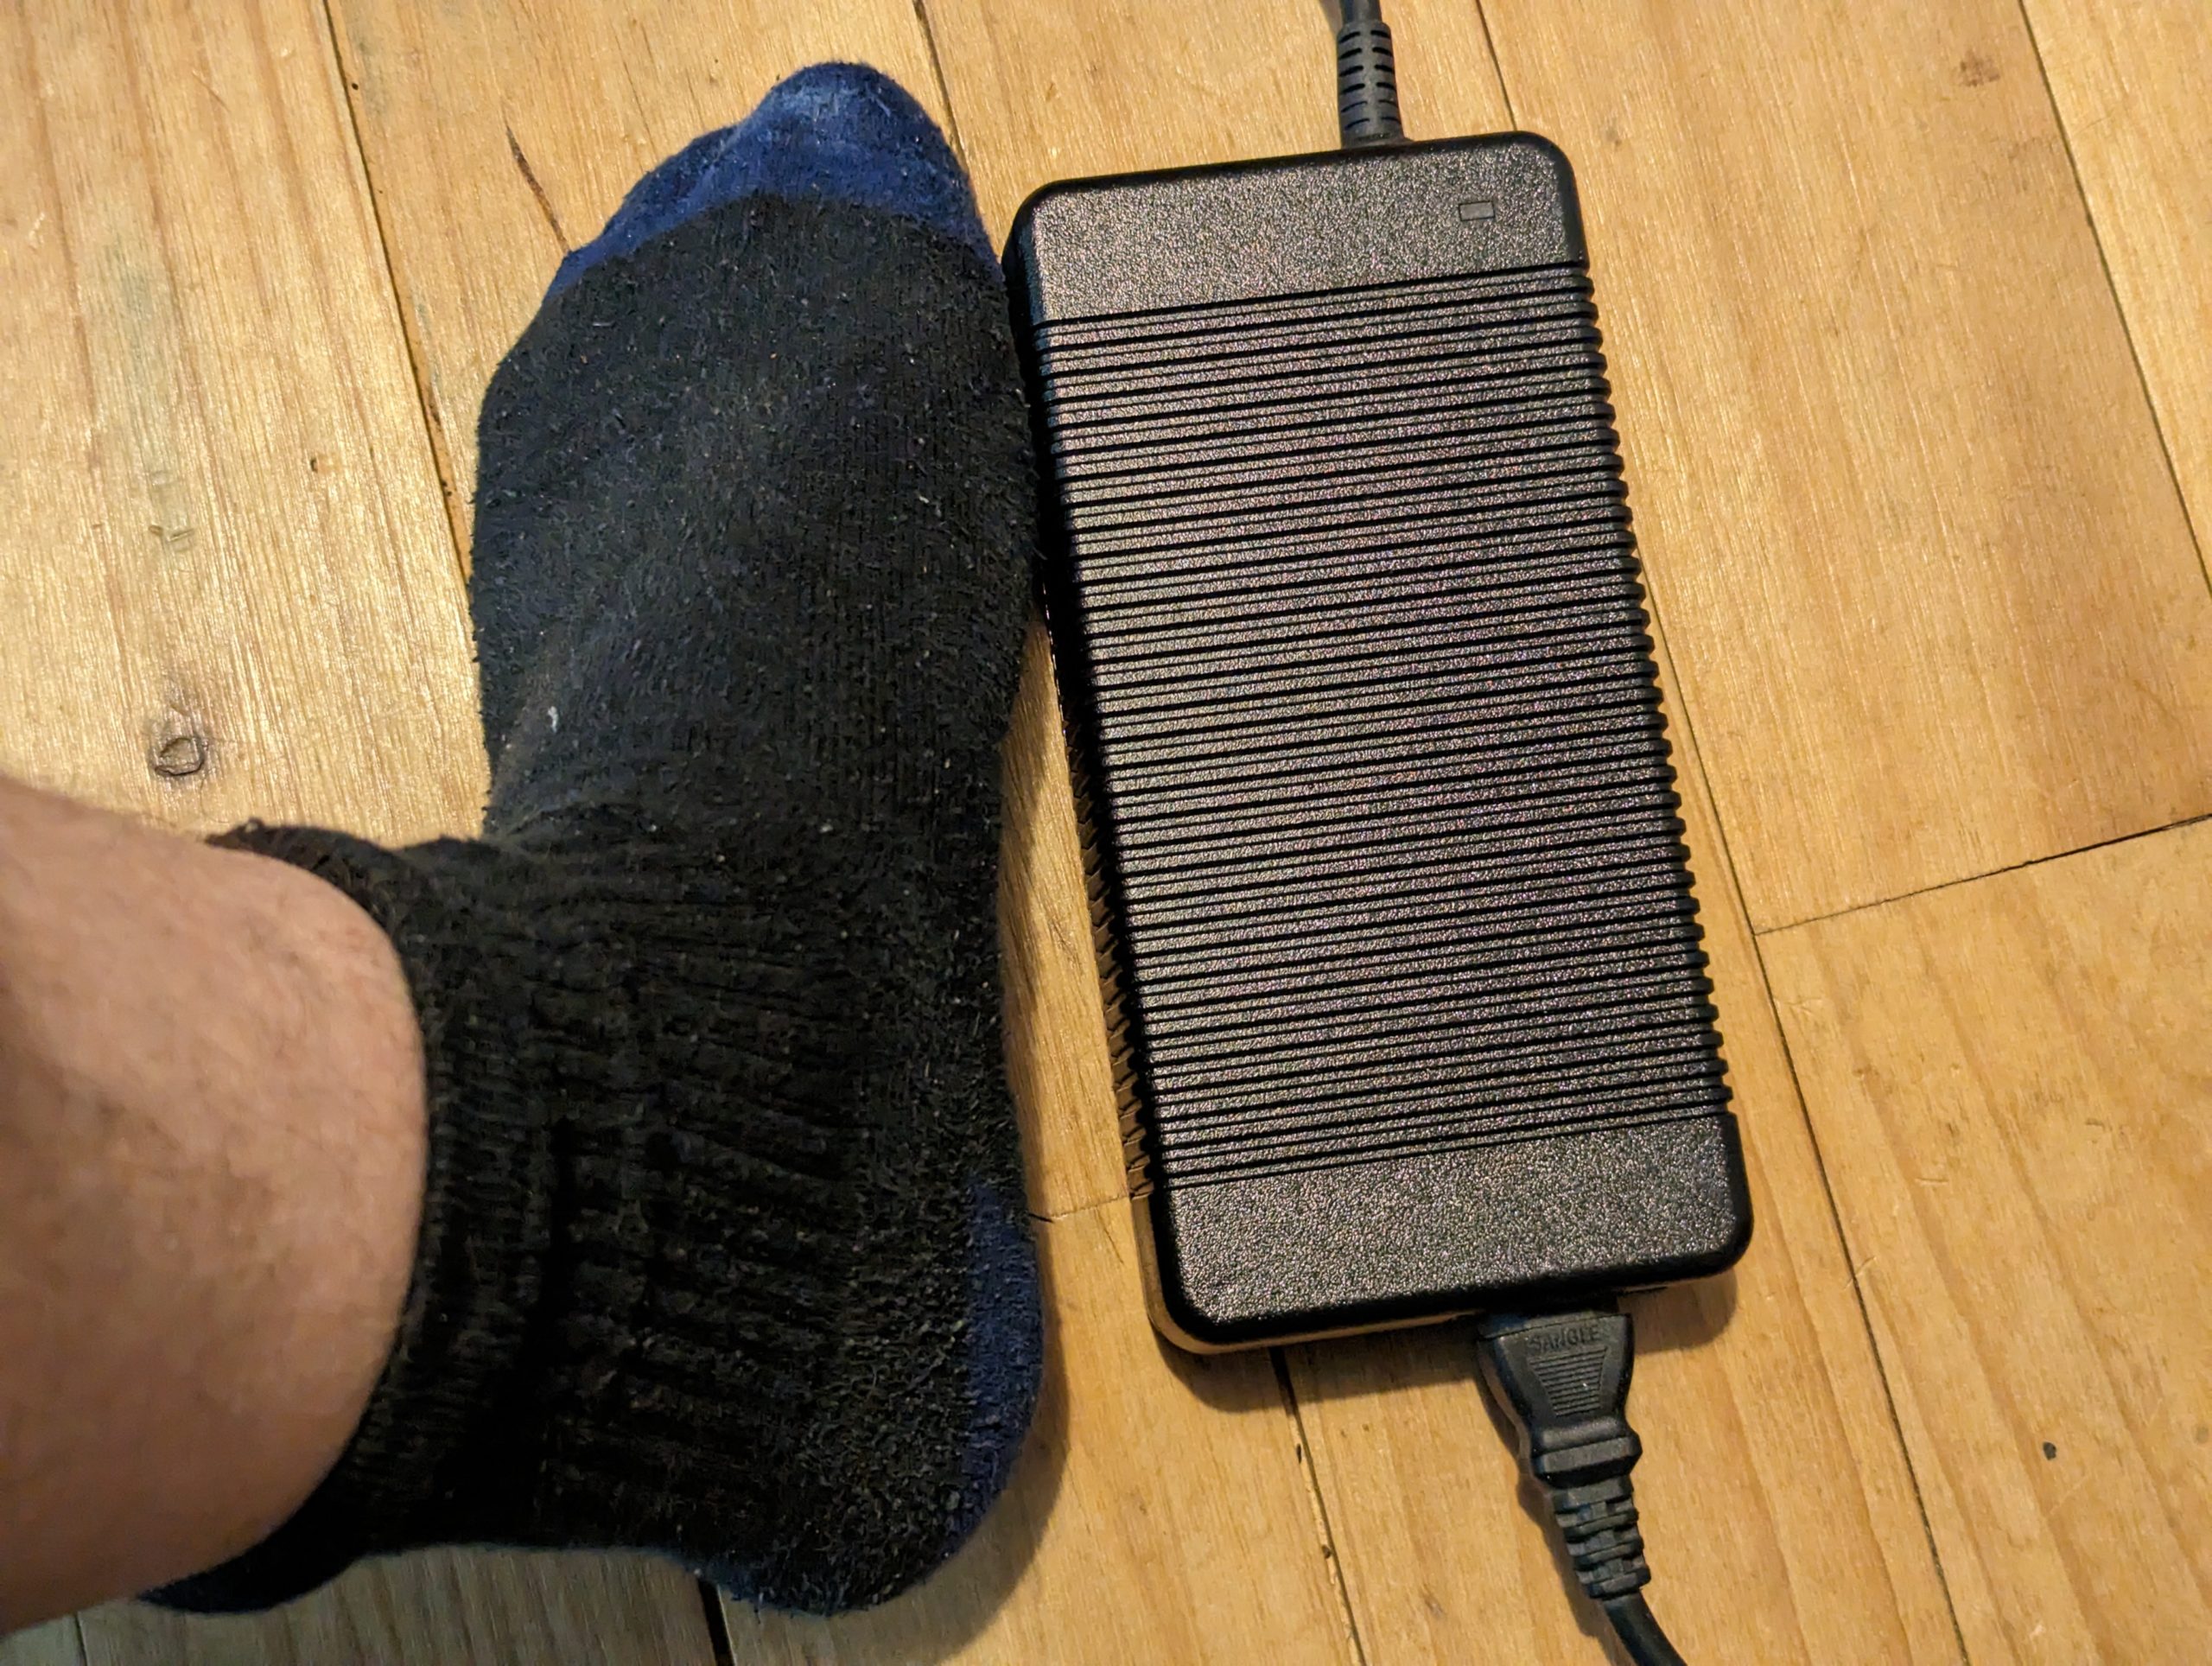 Foot for scale